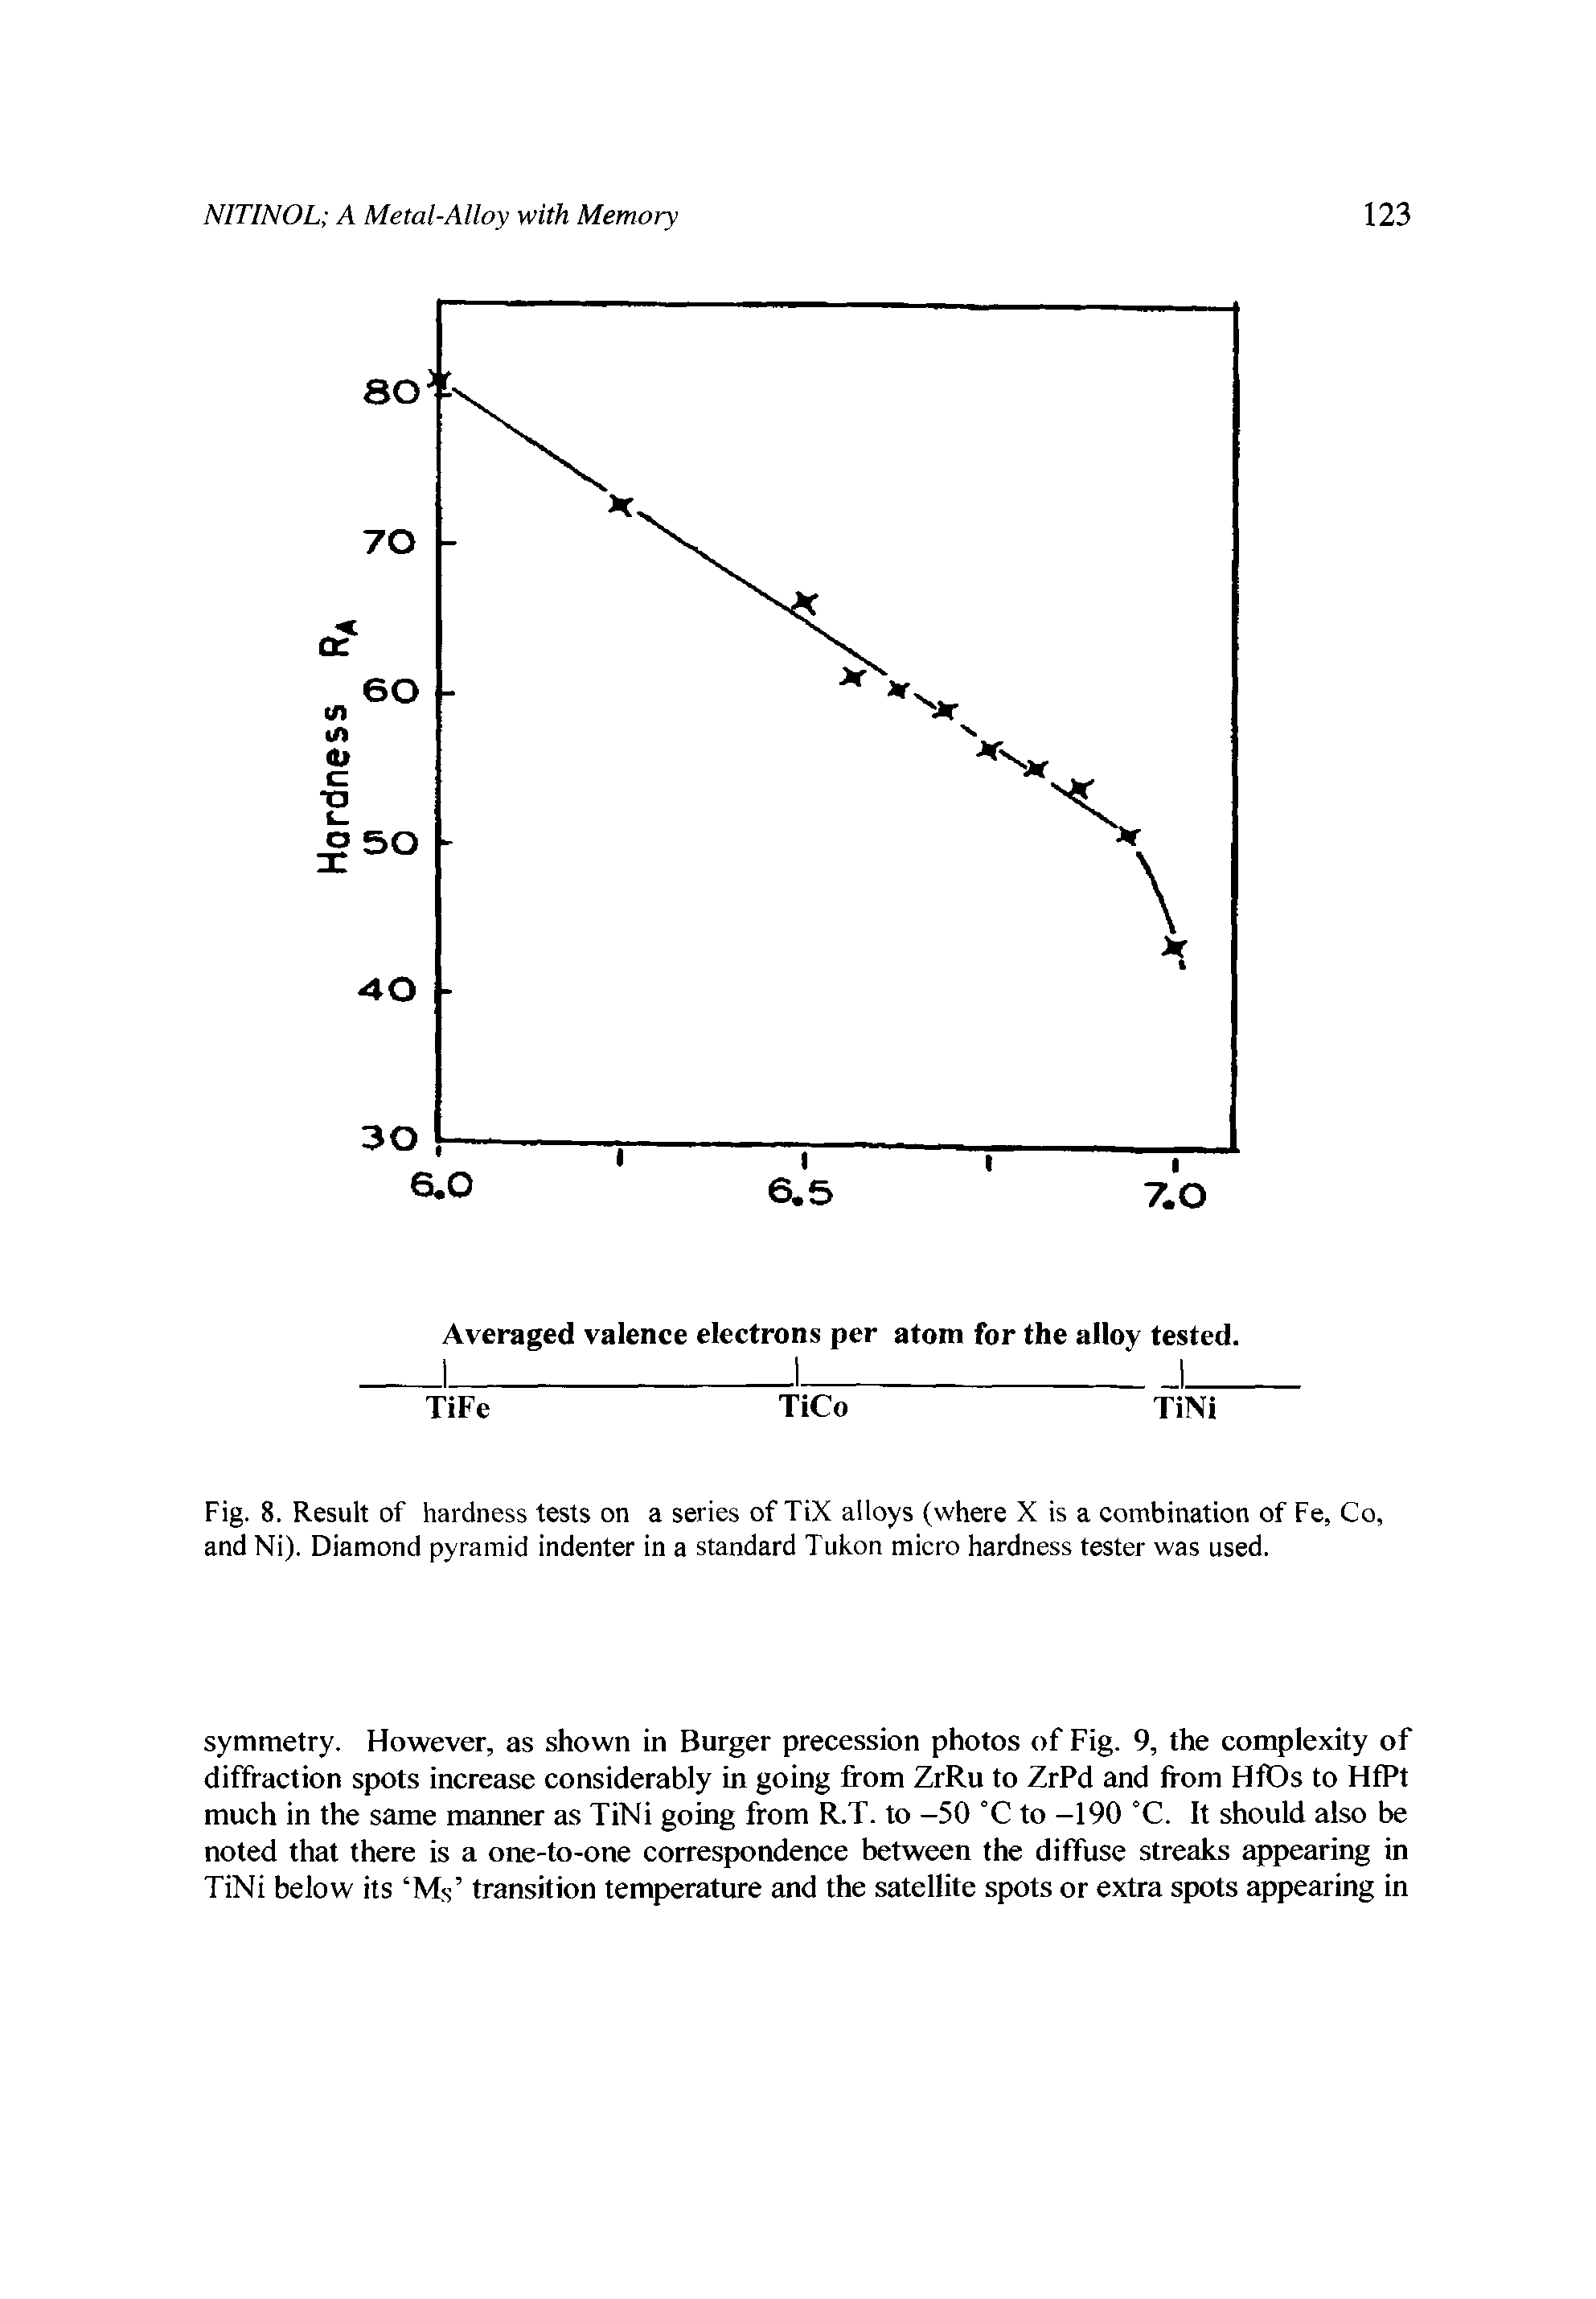 Fig. 8. Result of hardness tests on a series of TiX alloys (where X is a combination of Fe, Co, and Ni). Diamond pyramid indenter in a standard Tukon micro hardness tester was used.